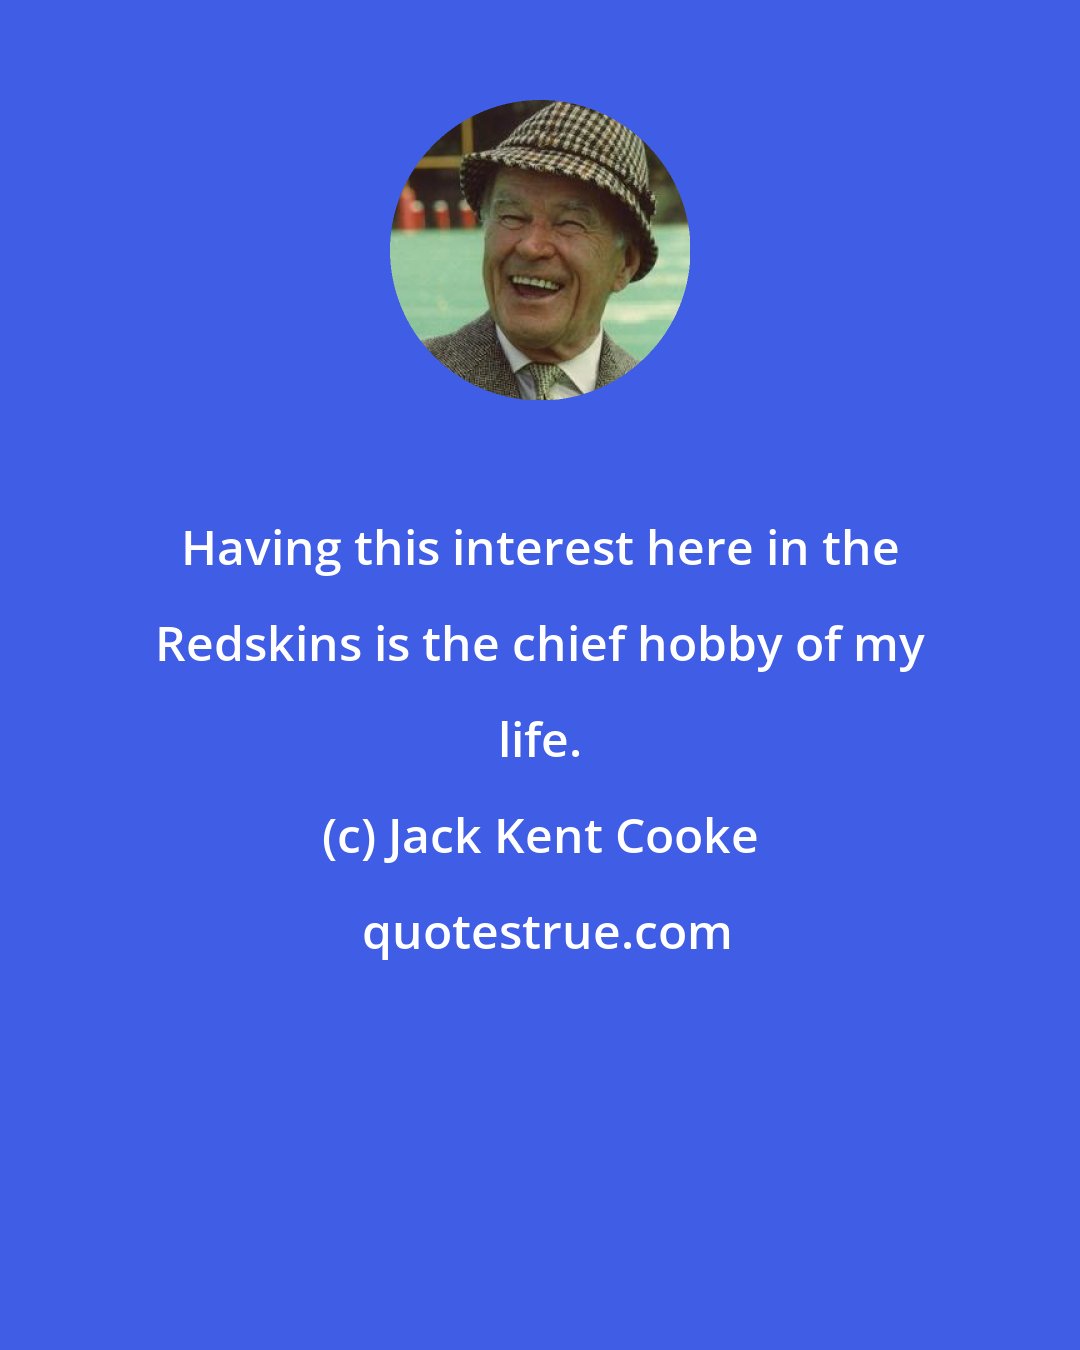 Jack Kent Cooke: Having this interest here in the Redskins is the chief hobby of my life.